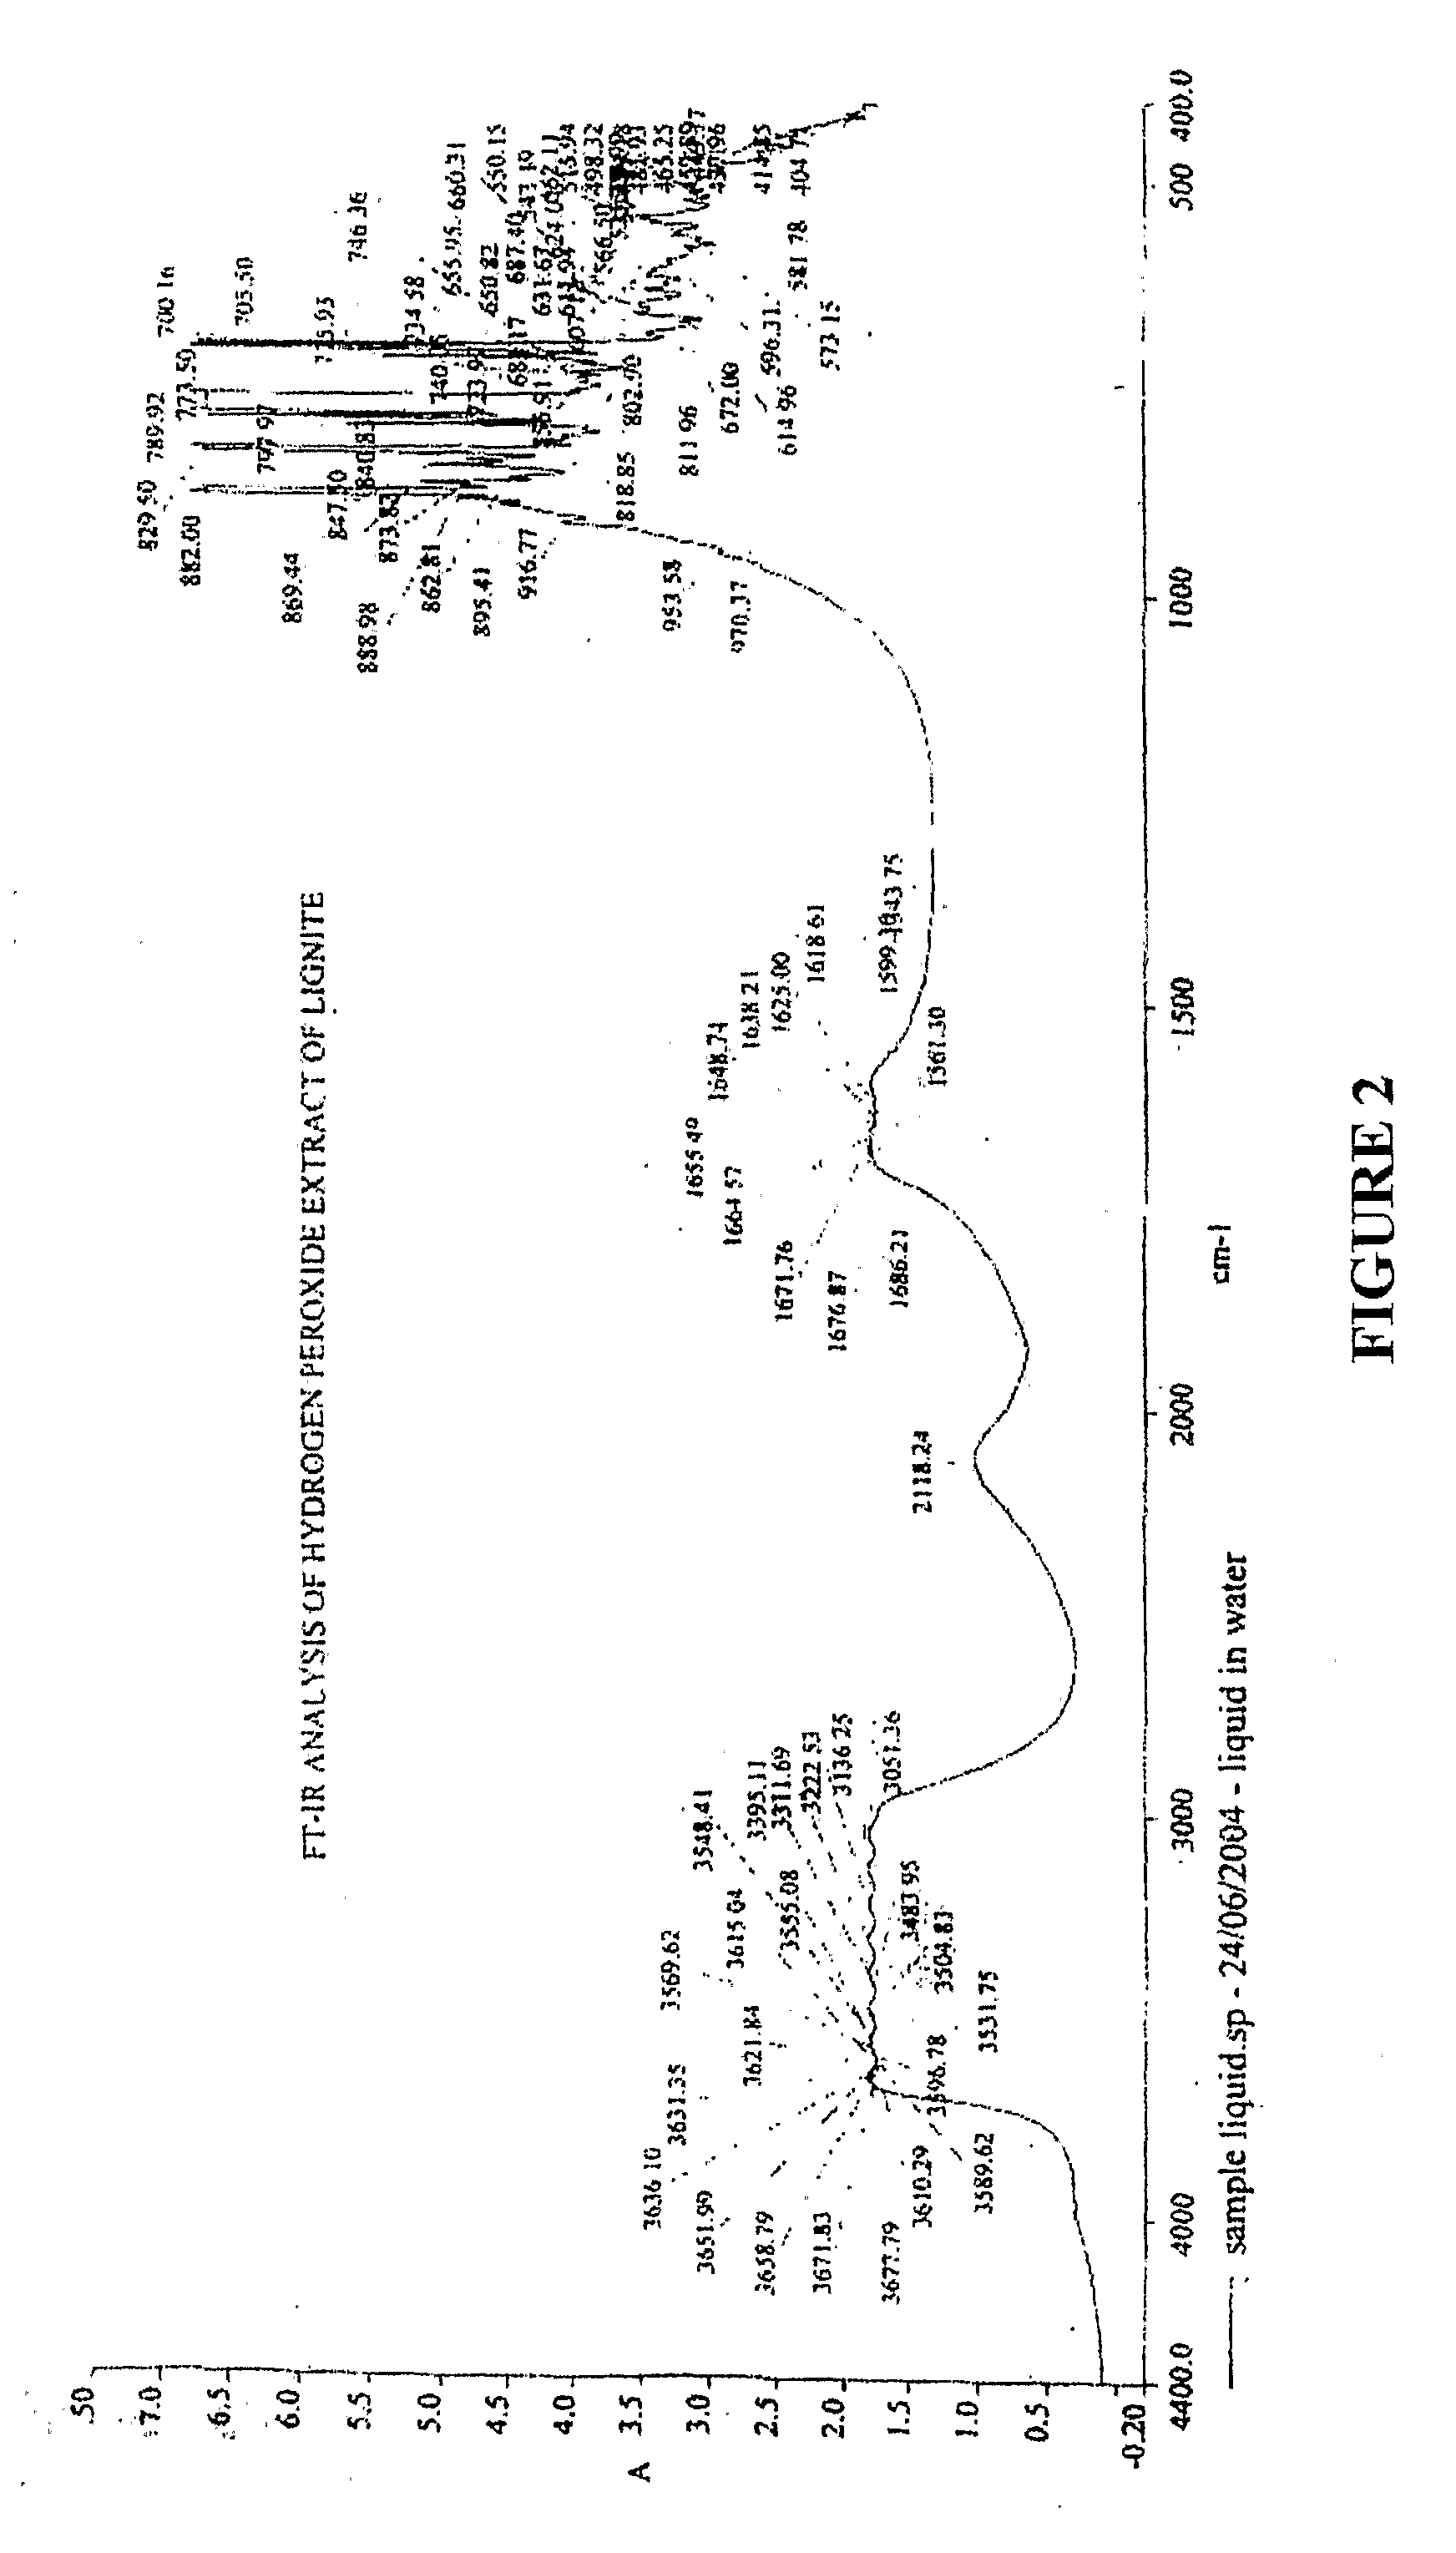 Structurally modified lignite with or without extraction of functionally enhanced organic molecules